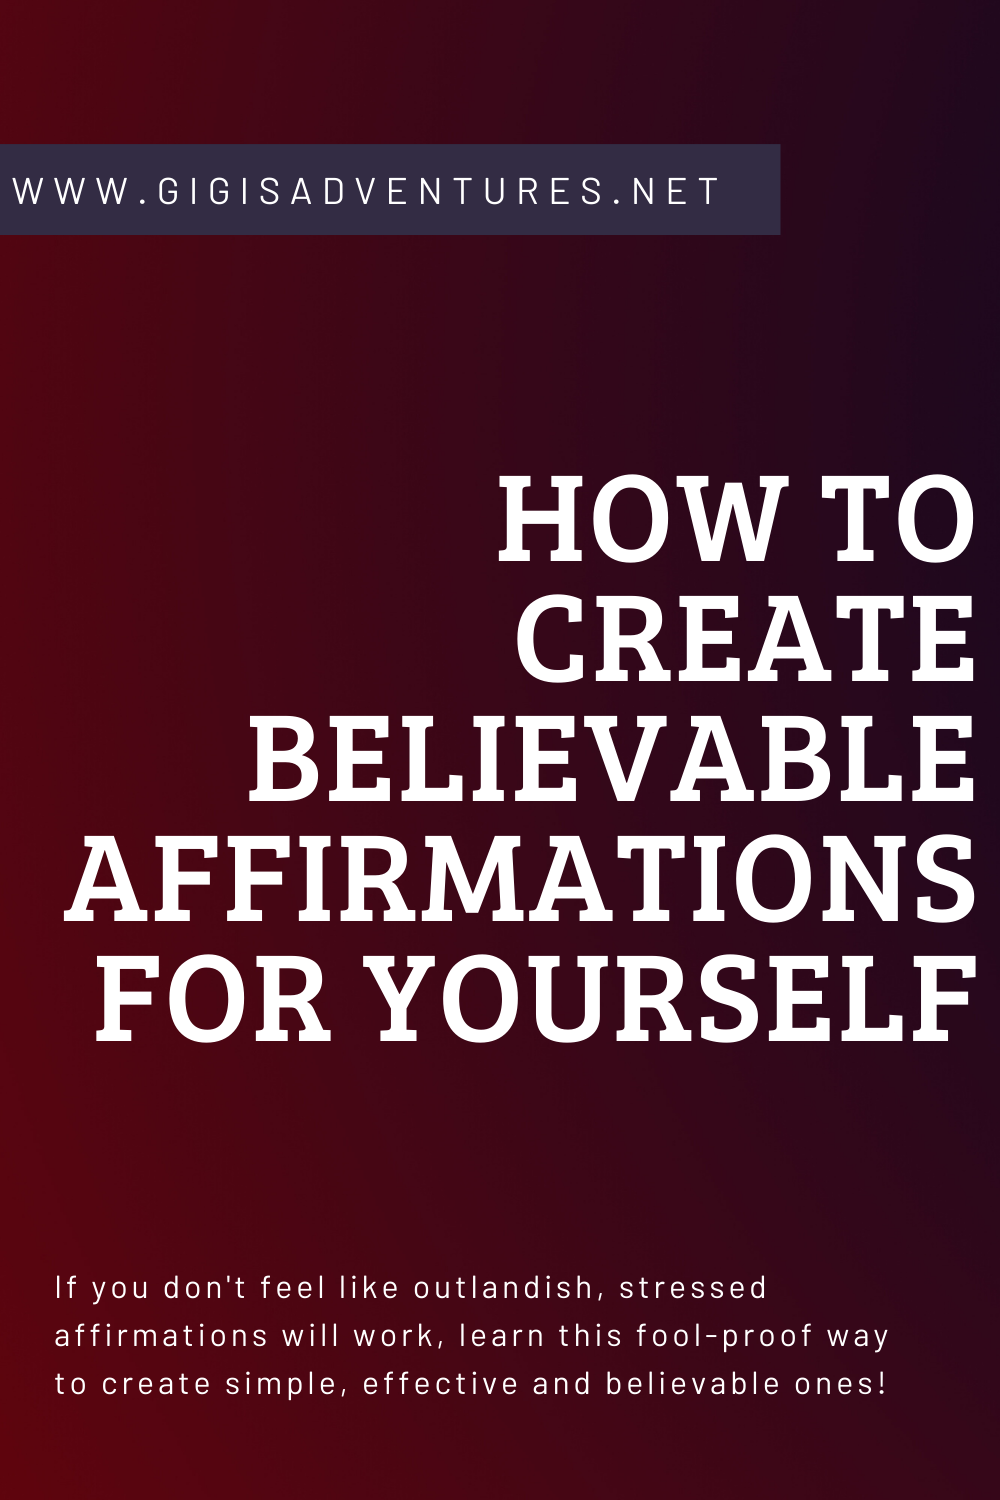 How To Create Believable Affirmations For Yourself | How To Make Affirmations